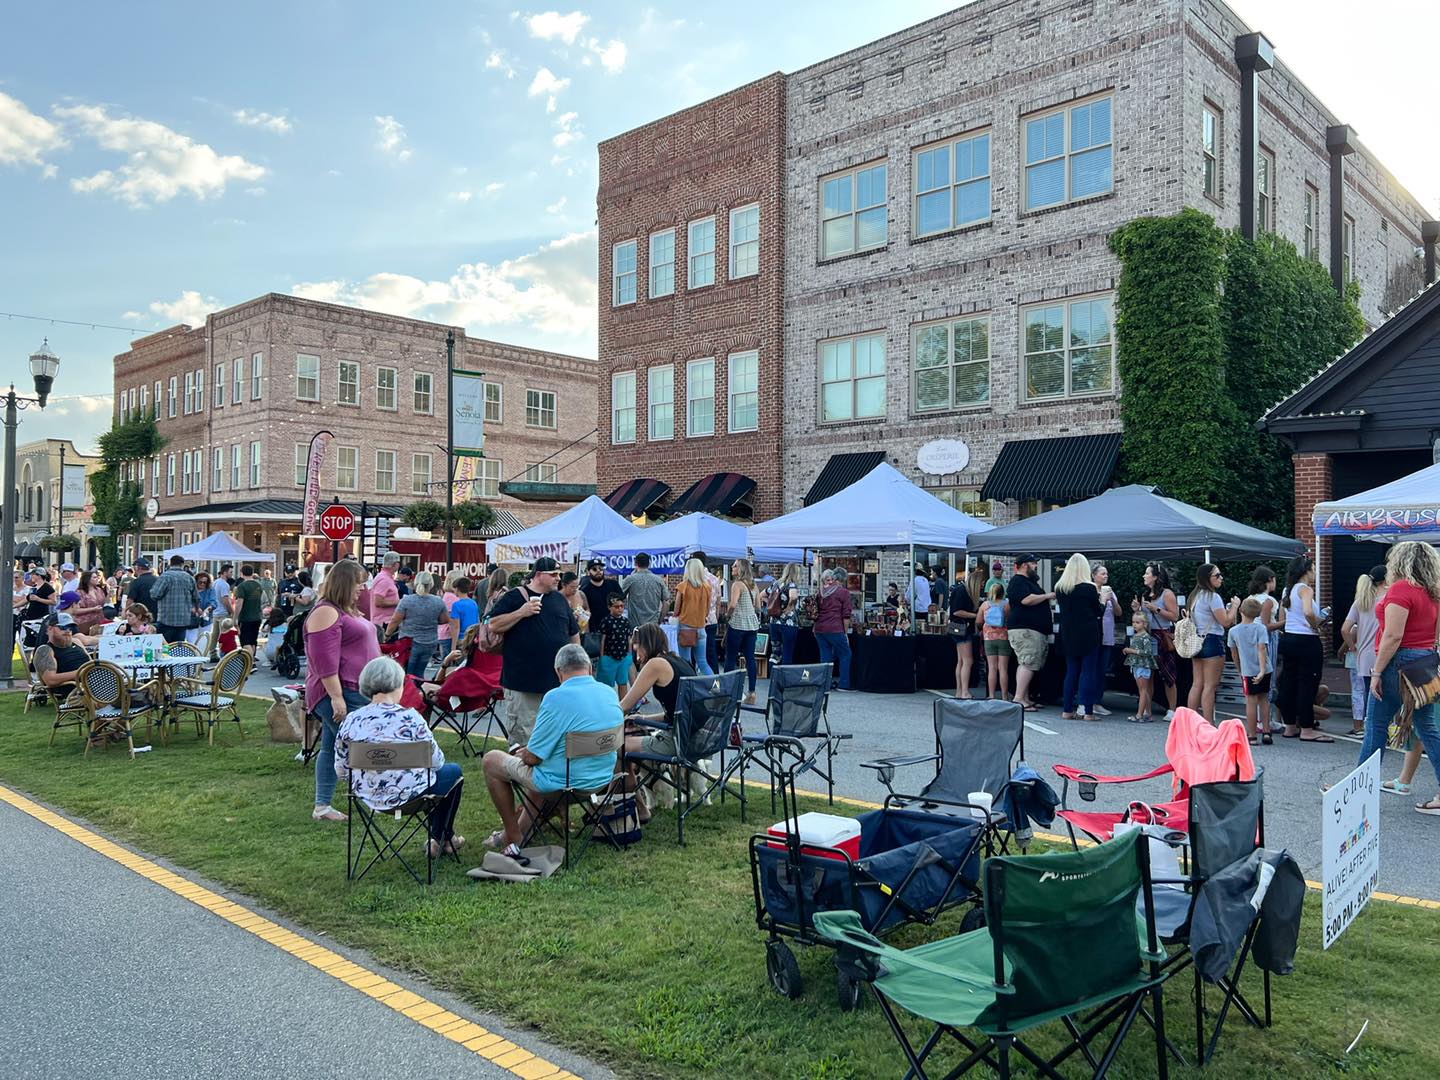 Friends and family gathering at Senoia Alive After Five event